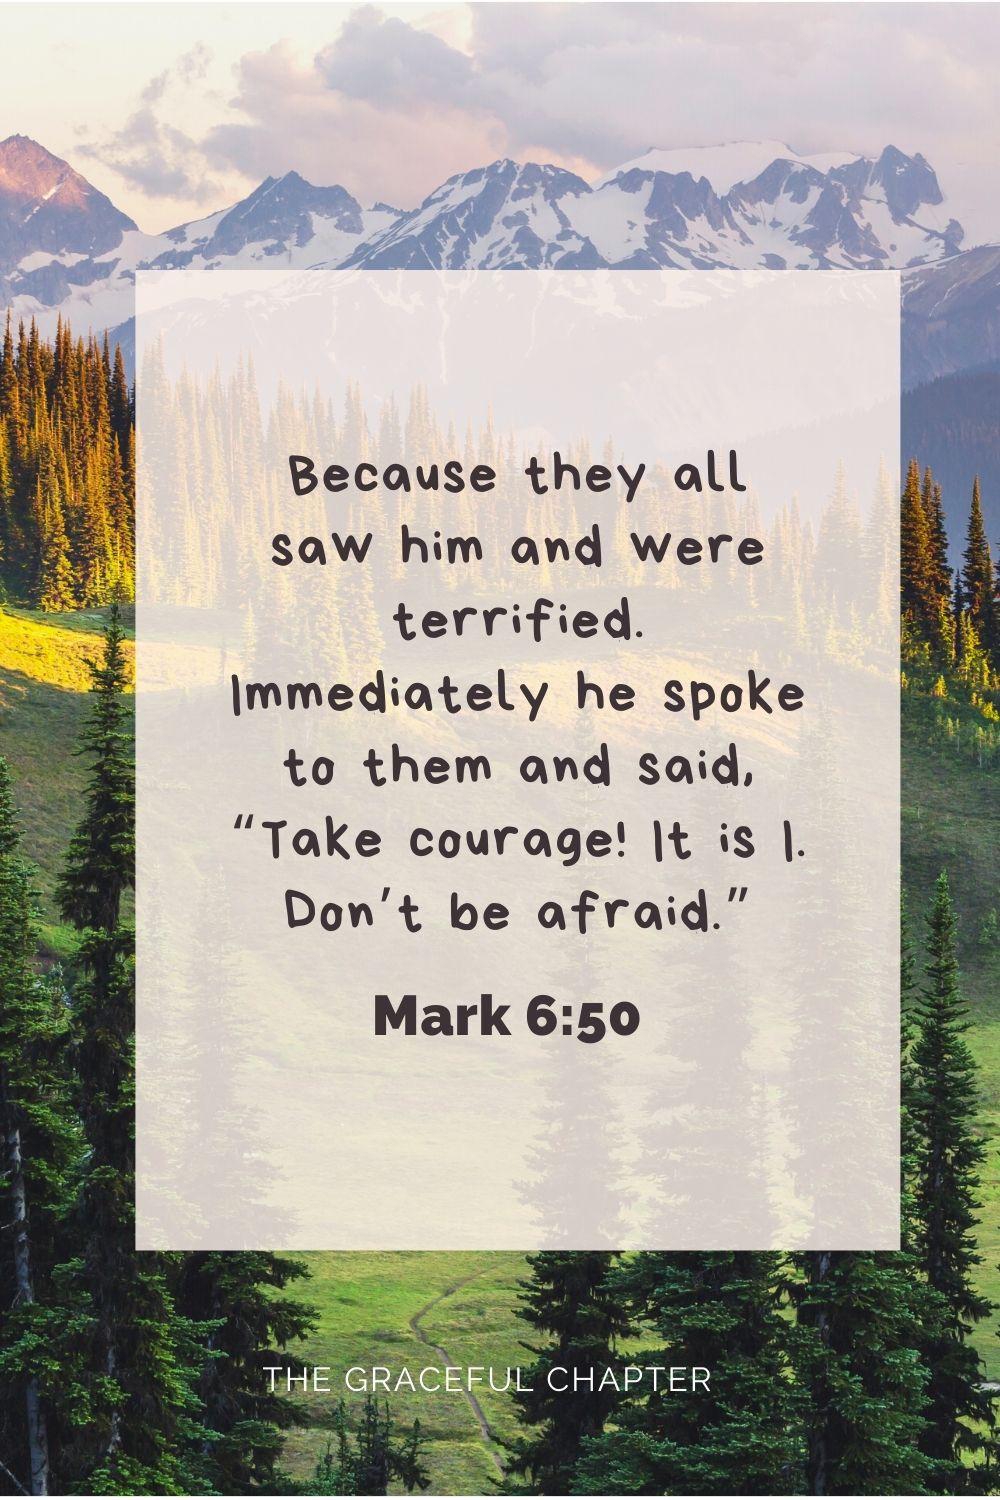 Because they all saw him and were terrified. Immediately he spoke to them and said, “Take courage! It is I. Don’t be afraid.” Mark 6:50